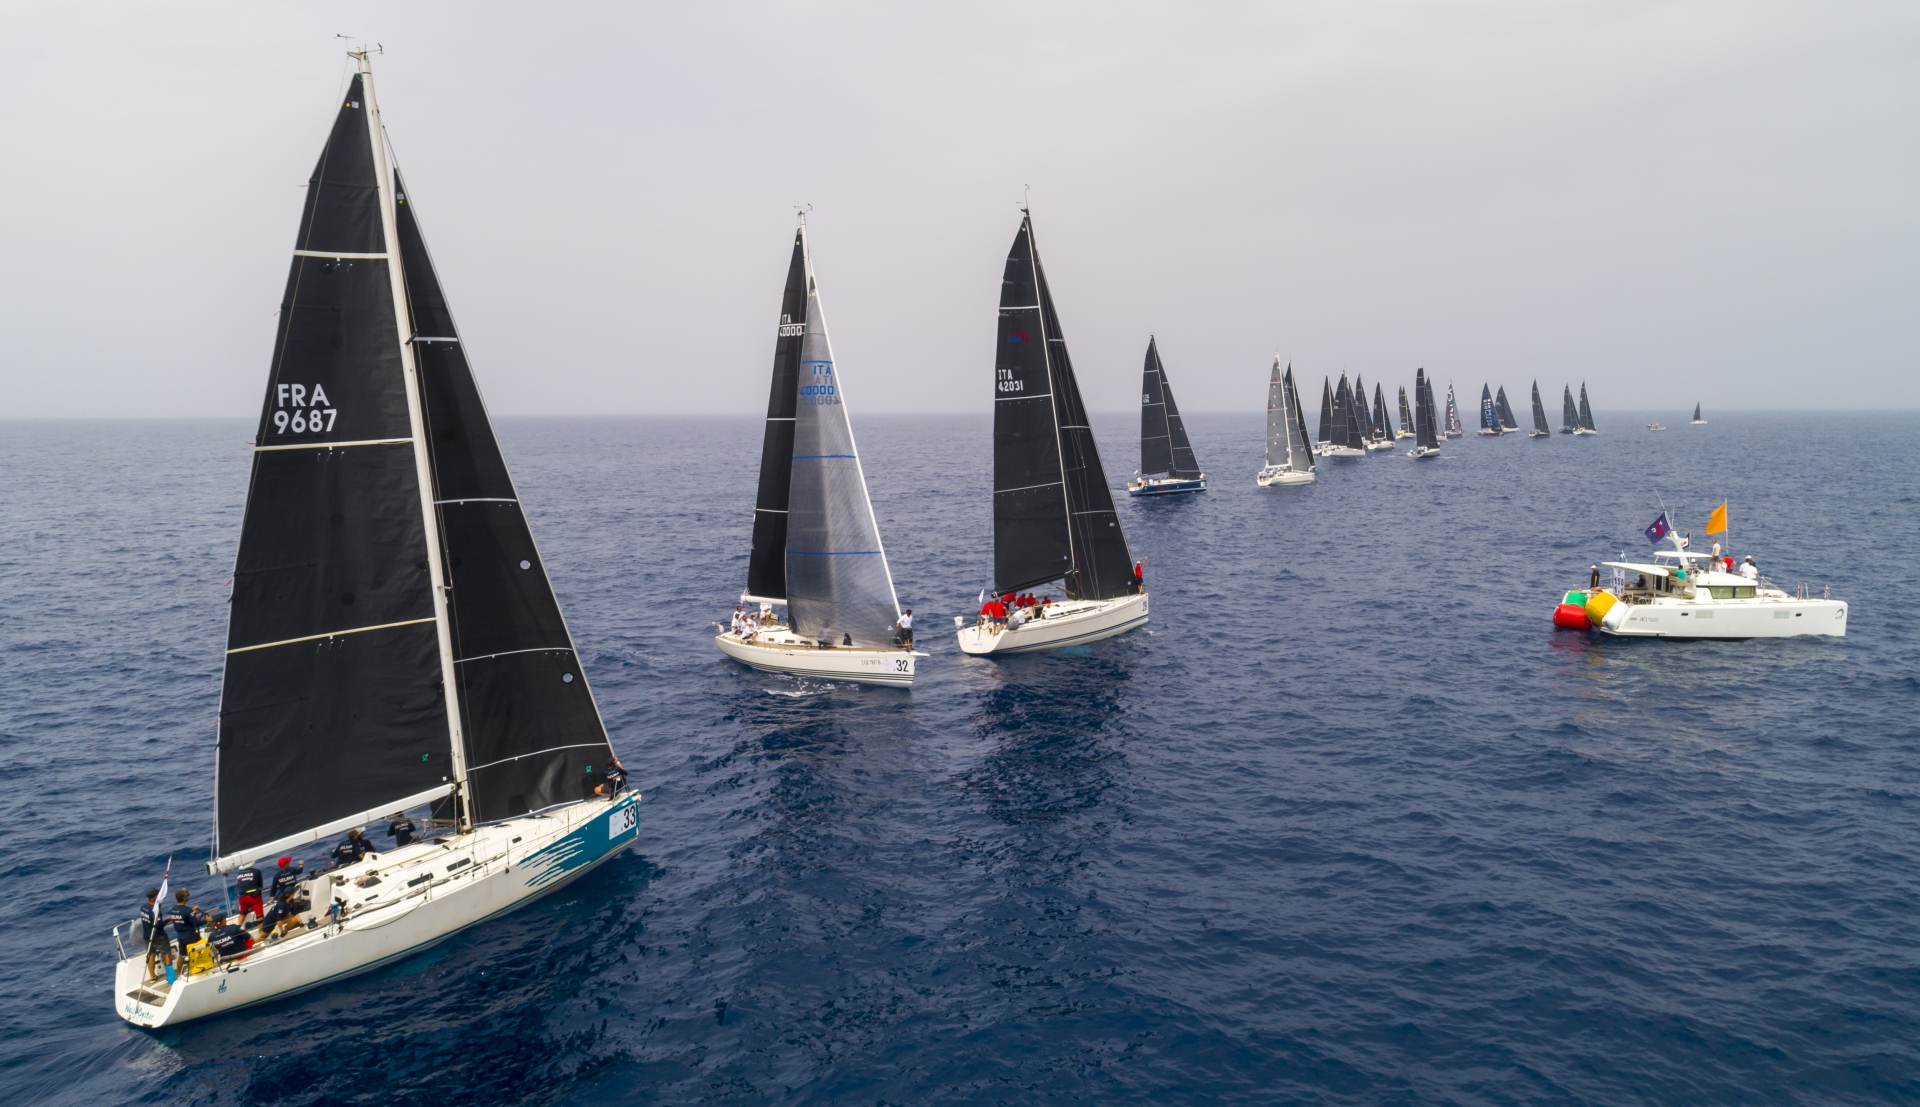 No racing on Day 3 of the 2022 ORC World Championship - News - Yacht Club Costa Smeralda